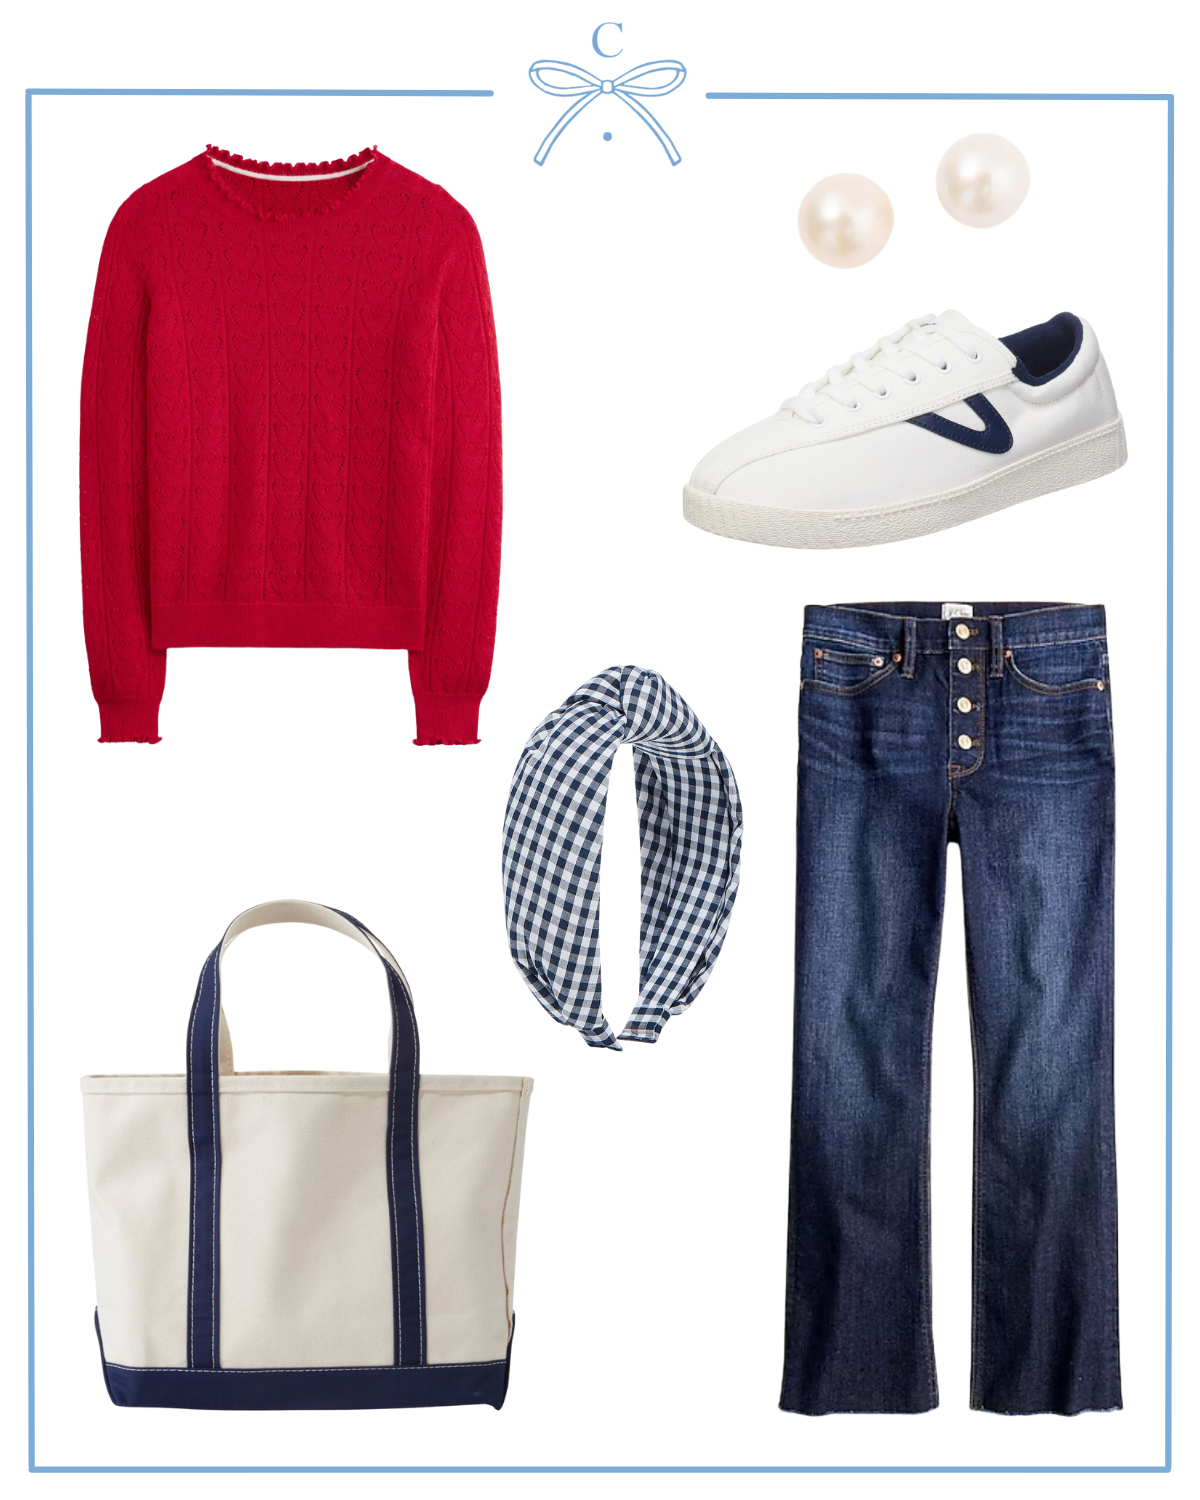 Valentine's Day outfit from Boden, J.Crew, Tretorn, Tuckernuck, Draper James, and L.L.Bean